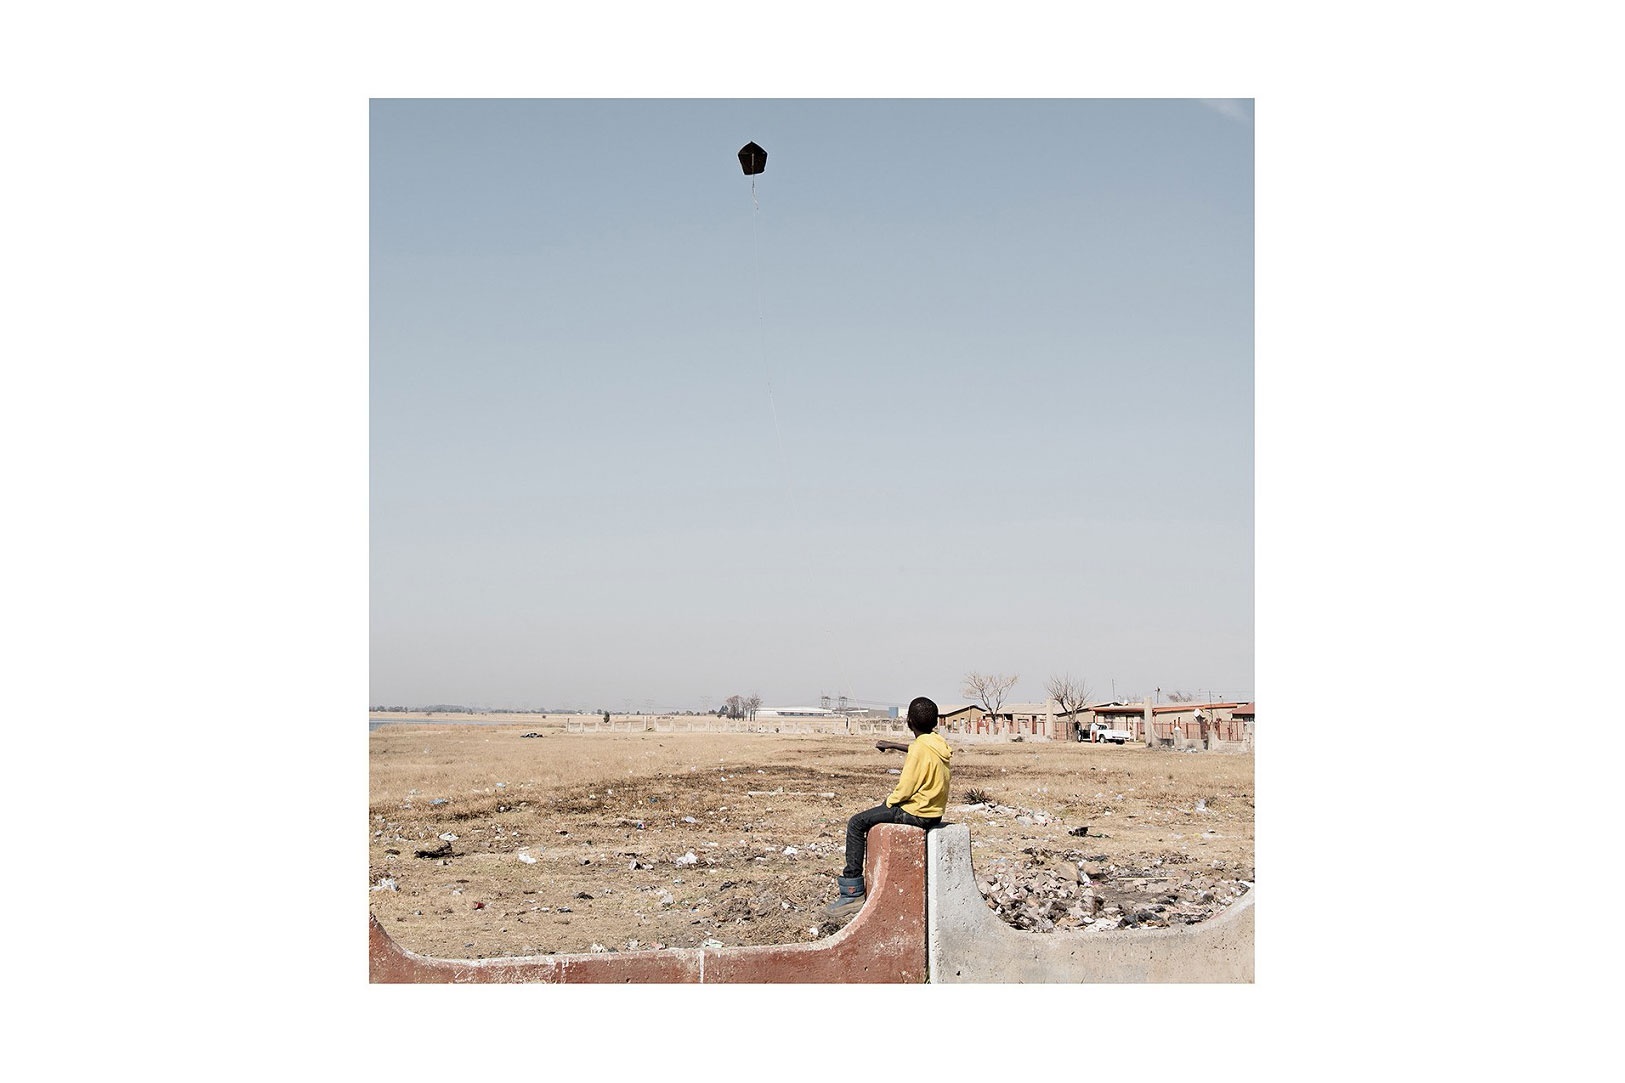 Photograph from Jabulani Dhlamini’s residency on A4’s top floor. At the front, ’Sharpville Kite’ depicts a child sitting on a cement boundary marker flying a kite. At the back, an empty field stretches to the horizon with some houses visible on the right.
